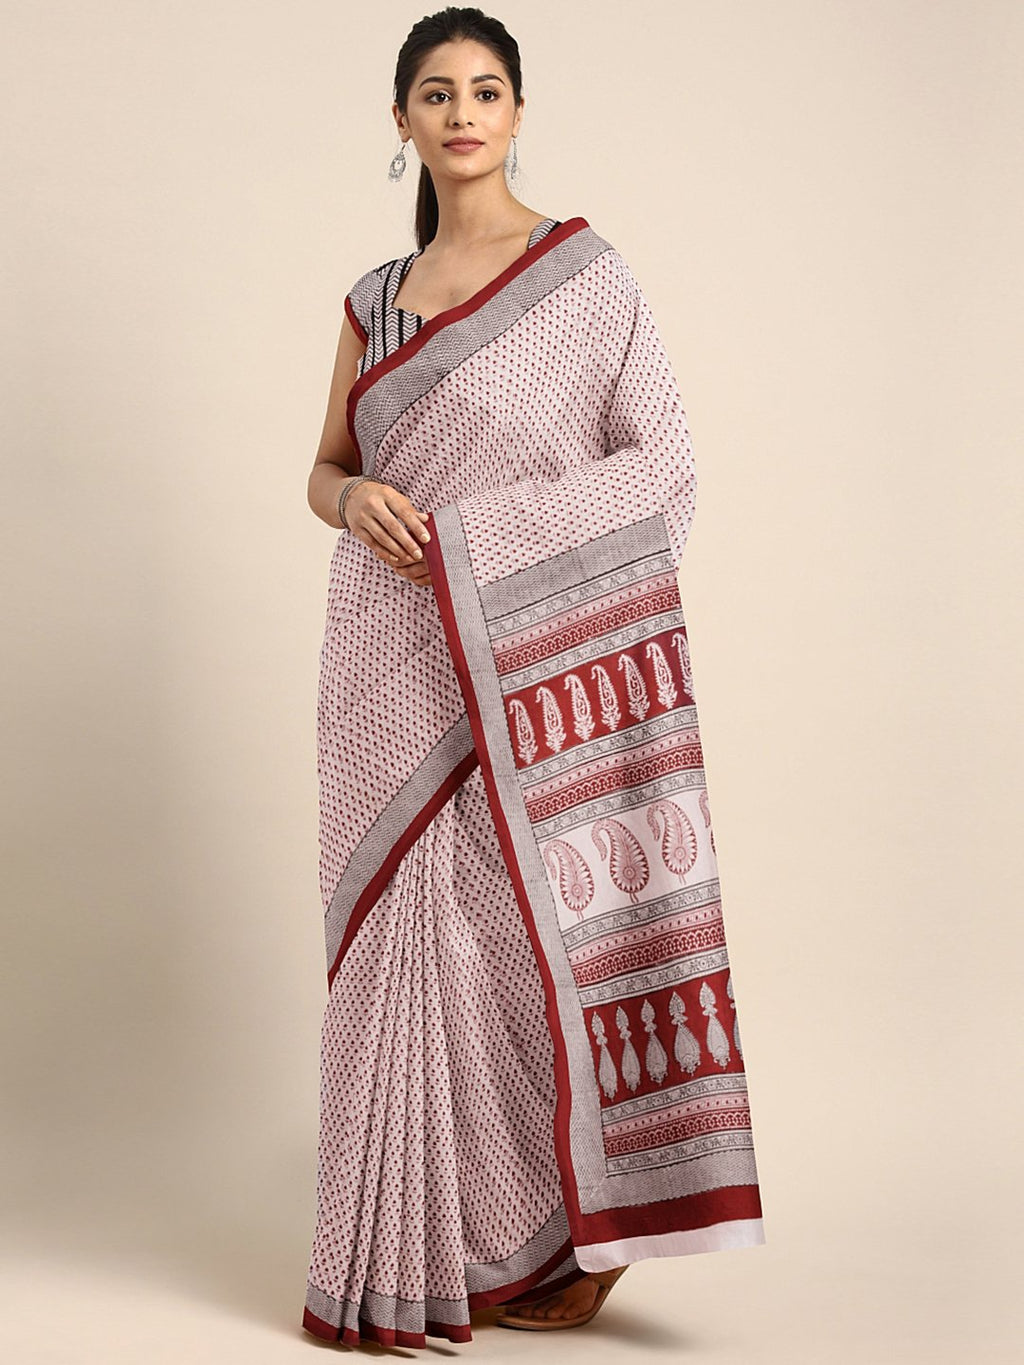 Peach-Coloured Maroon Pure Cotton Printed Saree-Saree-Kalakari India-MYBASA0024-Bagh, Cotton, Geographical Indication, Hand Blocks, Hand Crafted, Heritage Prints, Natural Dyes, Sarees, Sustainable Fabrics-[Linen,Ethnic,wear,Fashionista,Handloom,Handicraft,Indigo,blockprint,block,print,Cotton,Chanderi,Blue, latest,classy,party,bollywood,trendy,summer,style,traditional,formal,elegant,unique,style,hand,block,print, dabu,booti,gift,present,glamorous,affordable,collectible,Sari,Saree,printed, holi, D